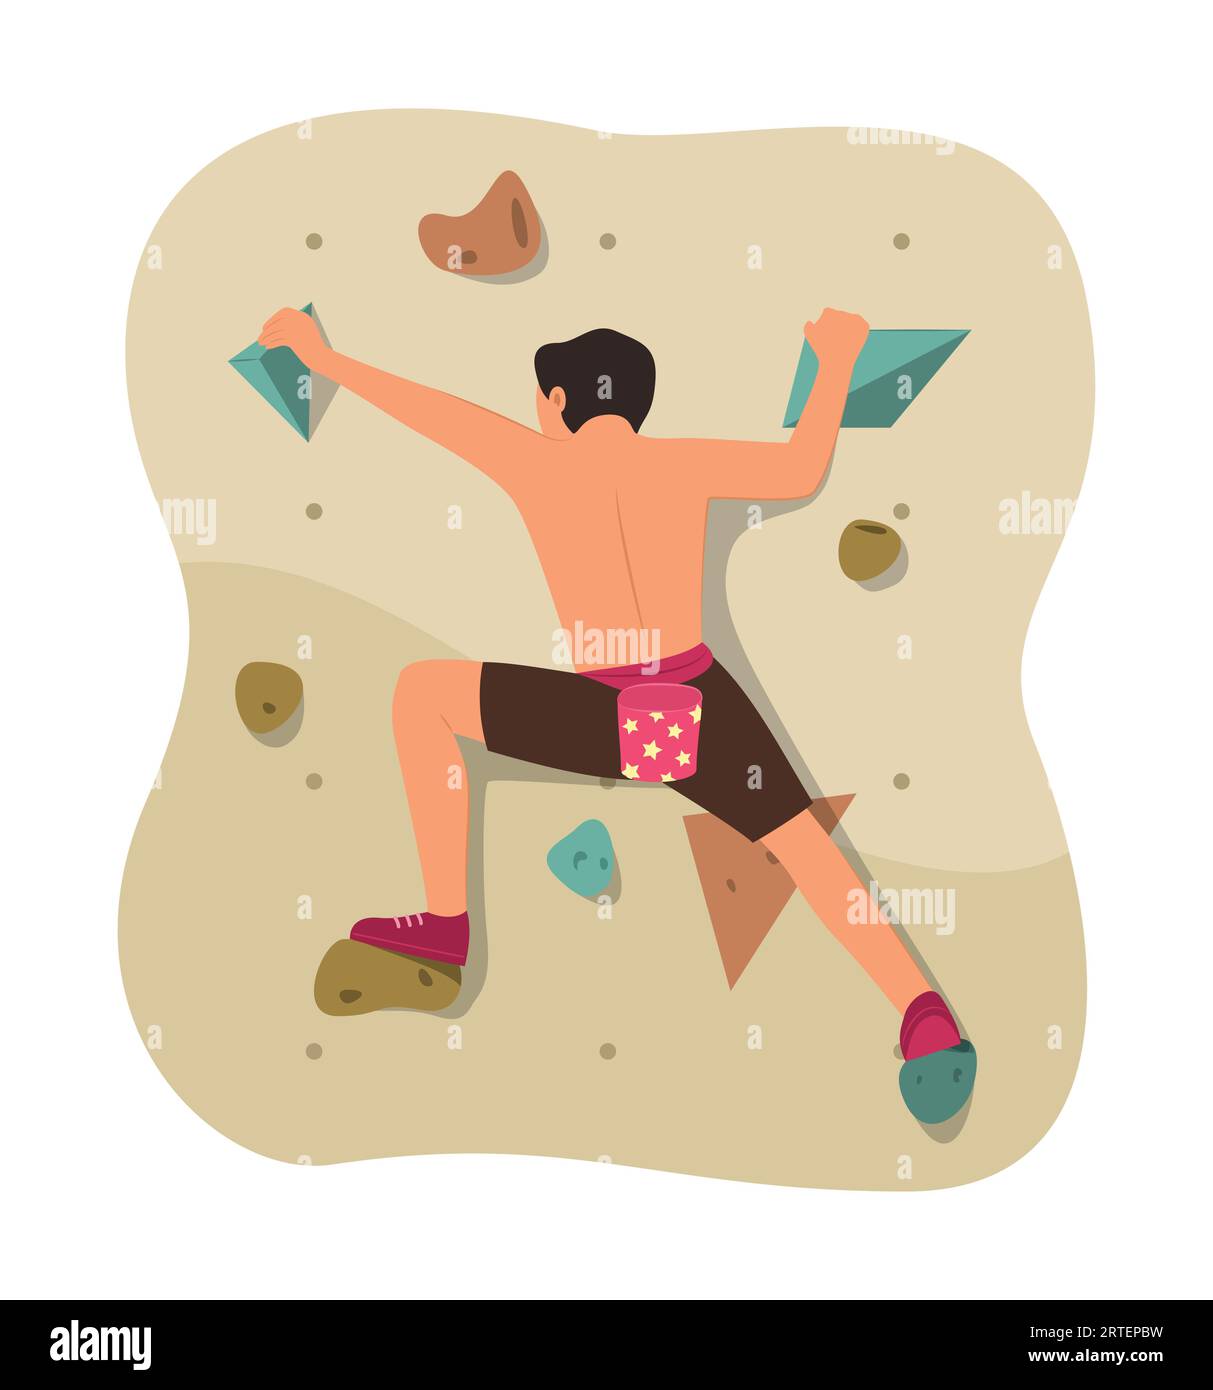 Athlete Man Exercise with Sport Climbing Concept Illustration Stock Vector